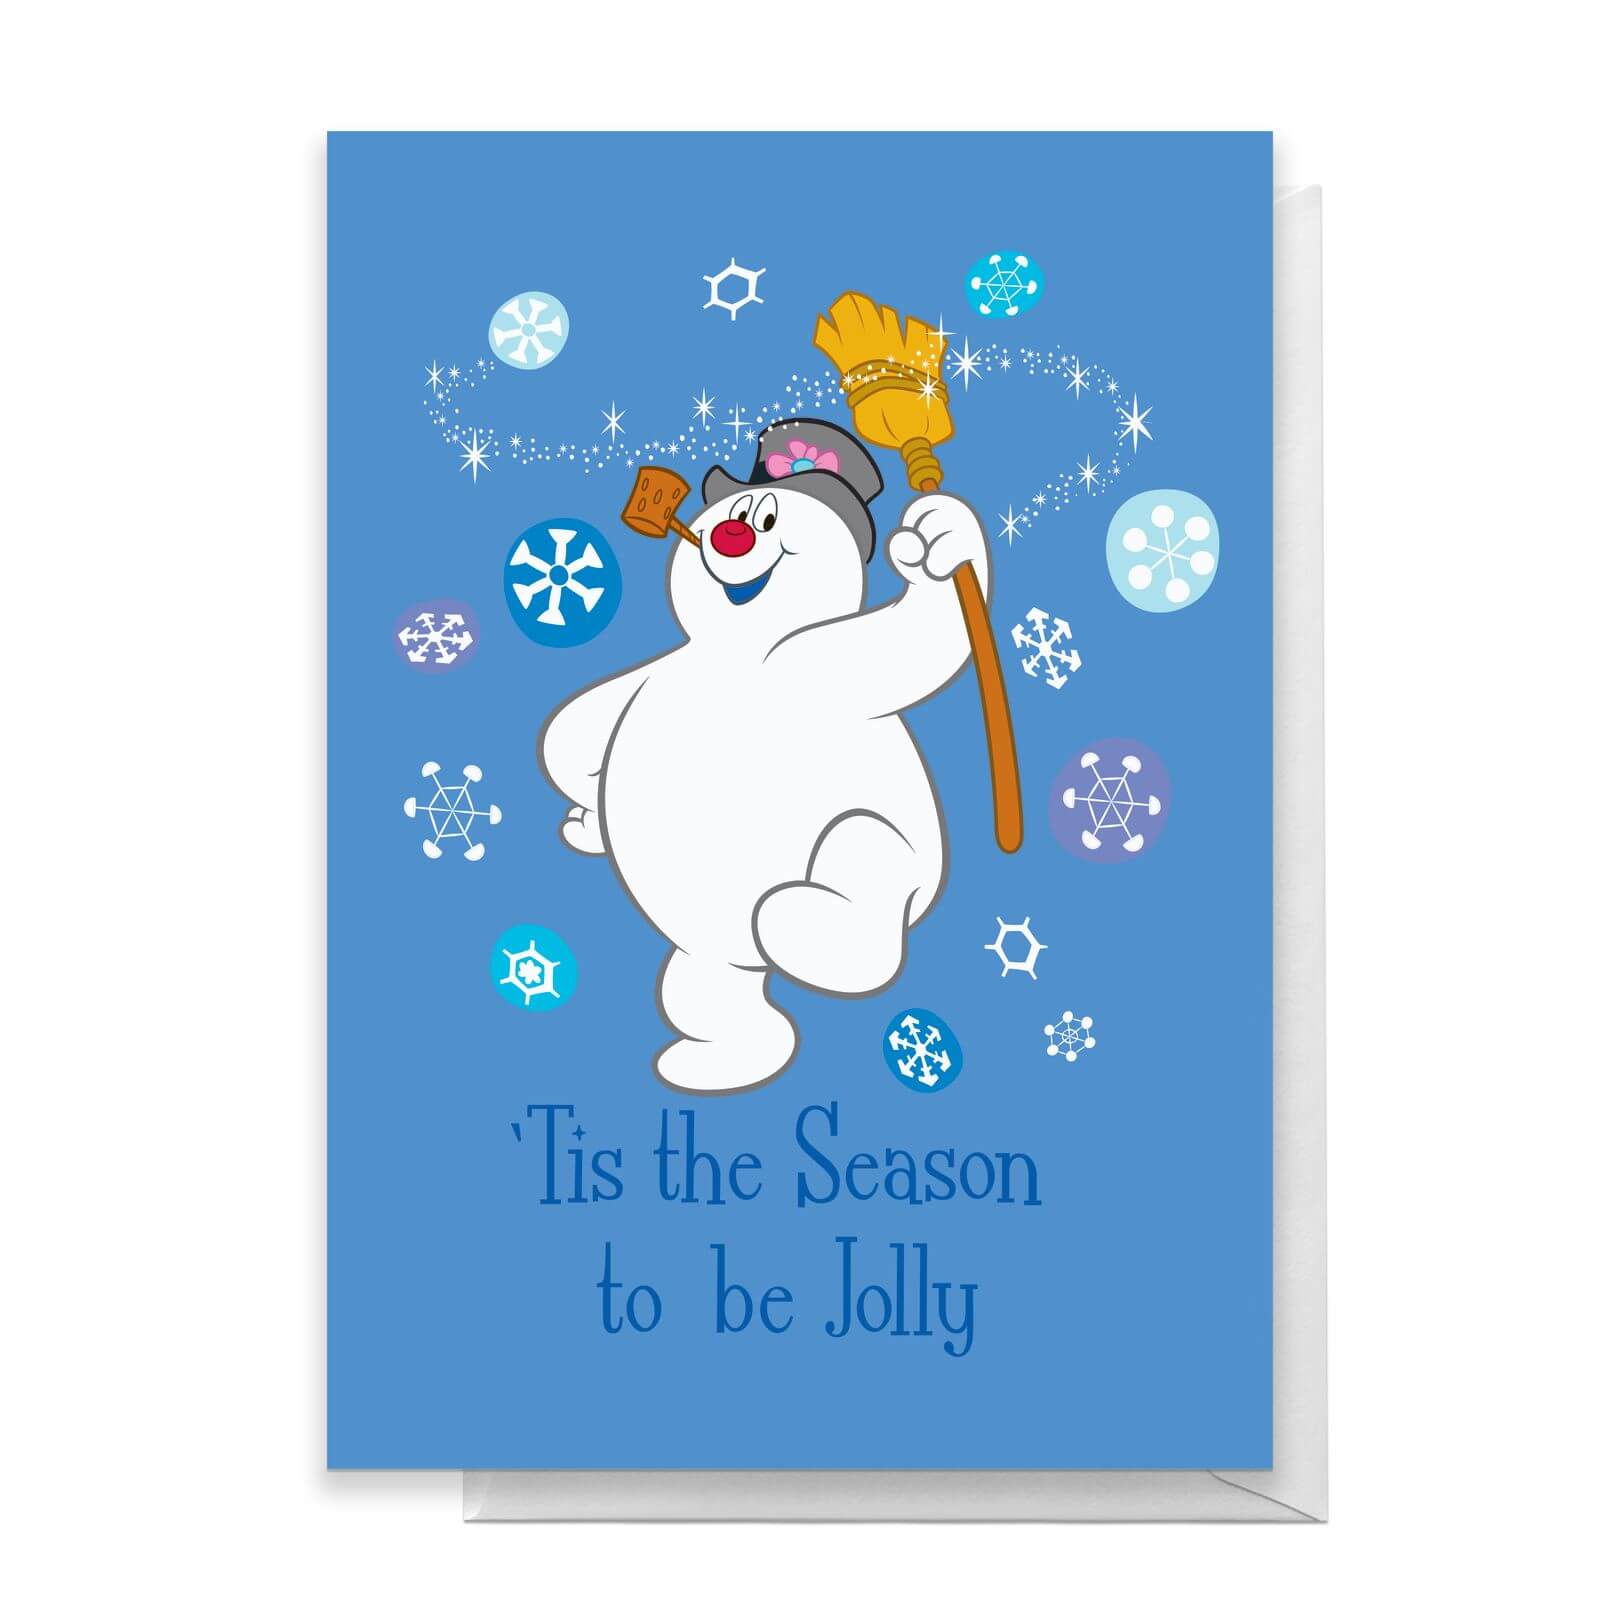 Tis The Season To Be Jolly Greetings Card   Standard Card